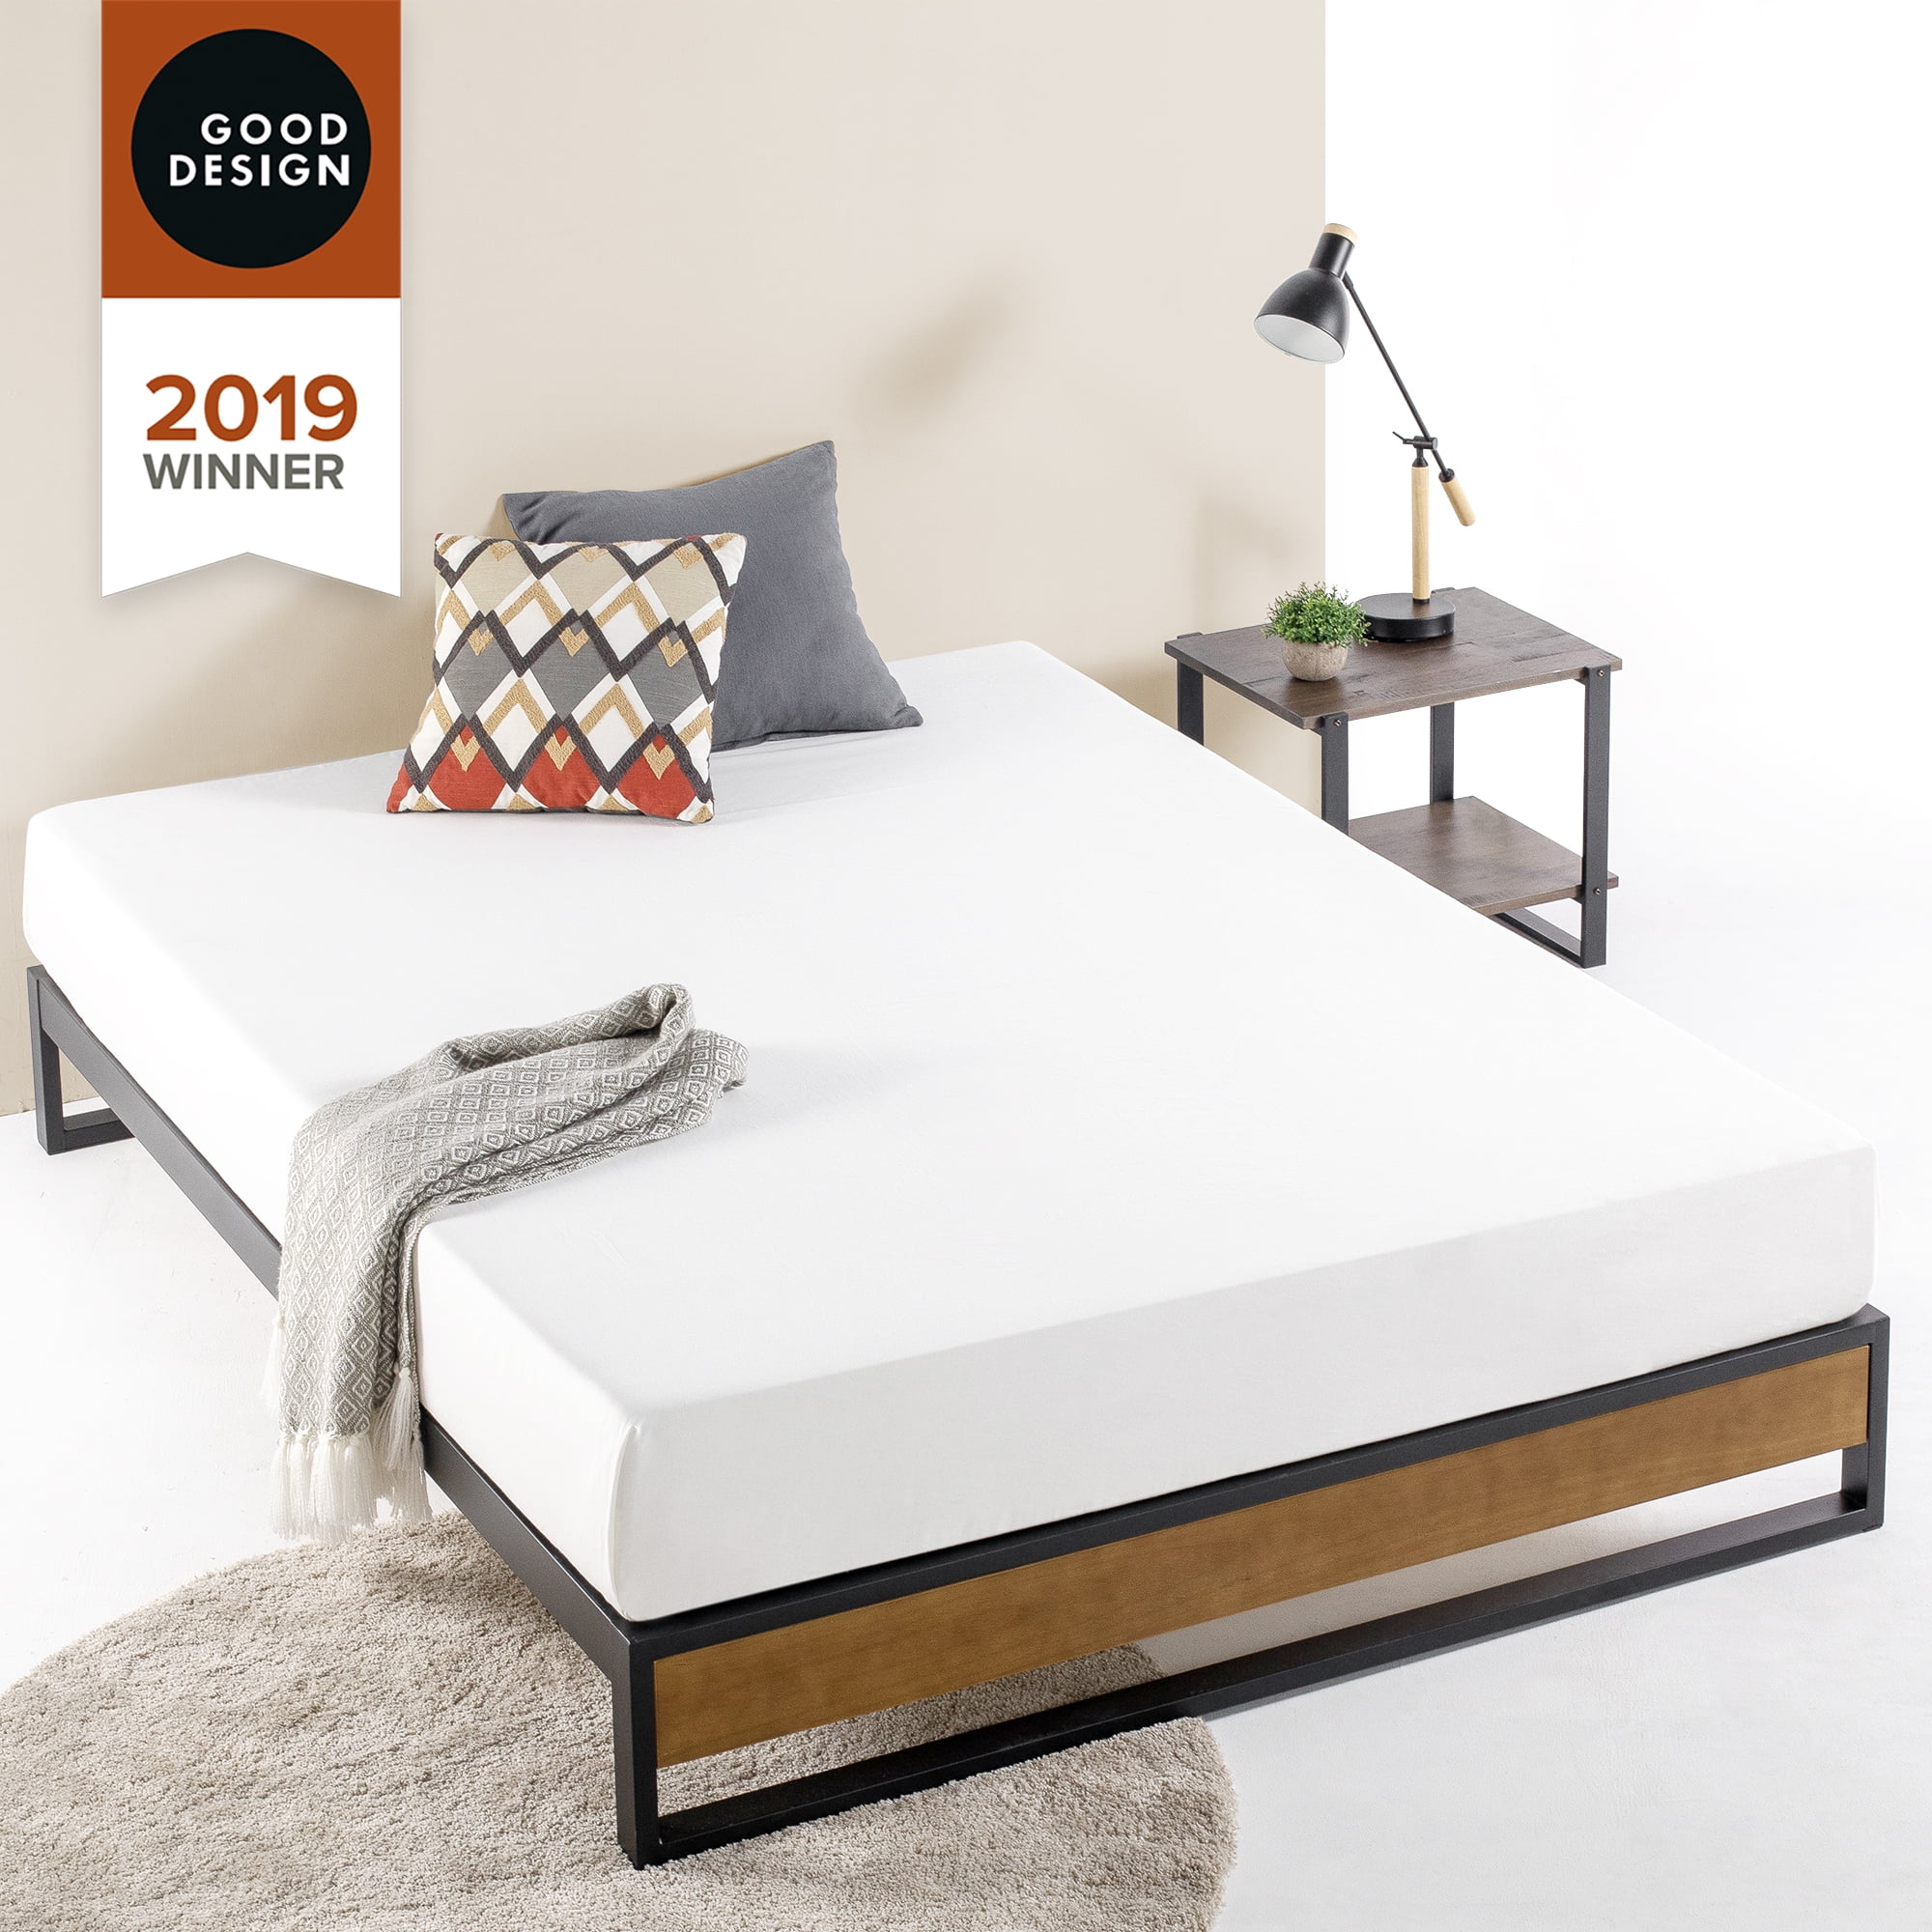 Zinus Good Design Winner Suzanne 10, Are Beds With Slats Good